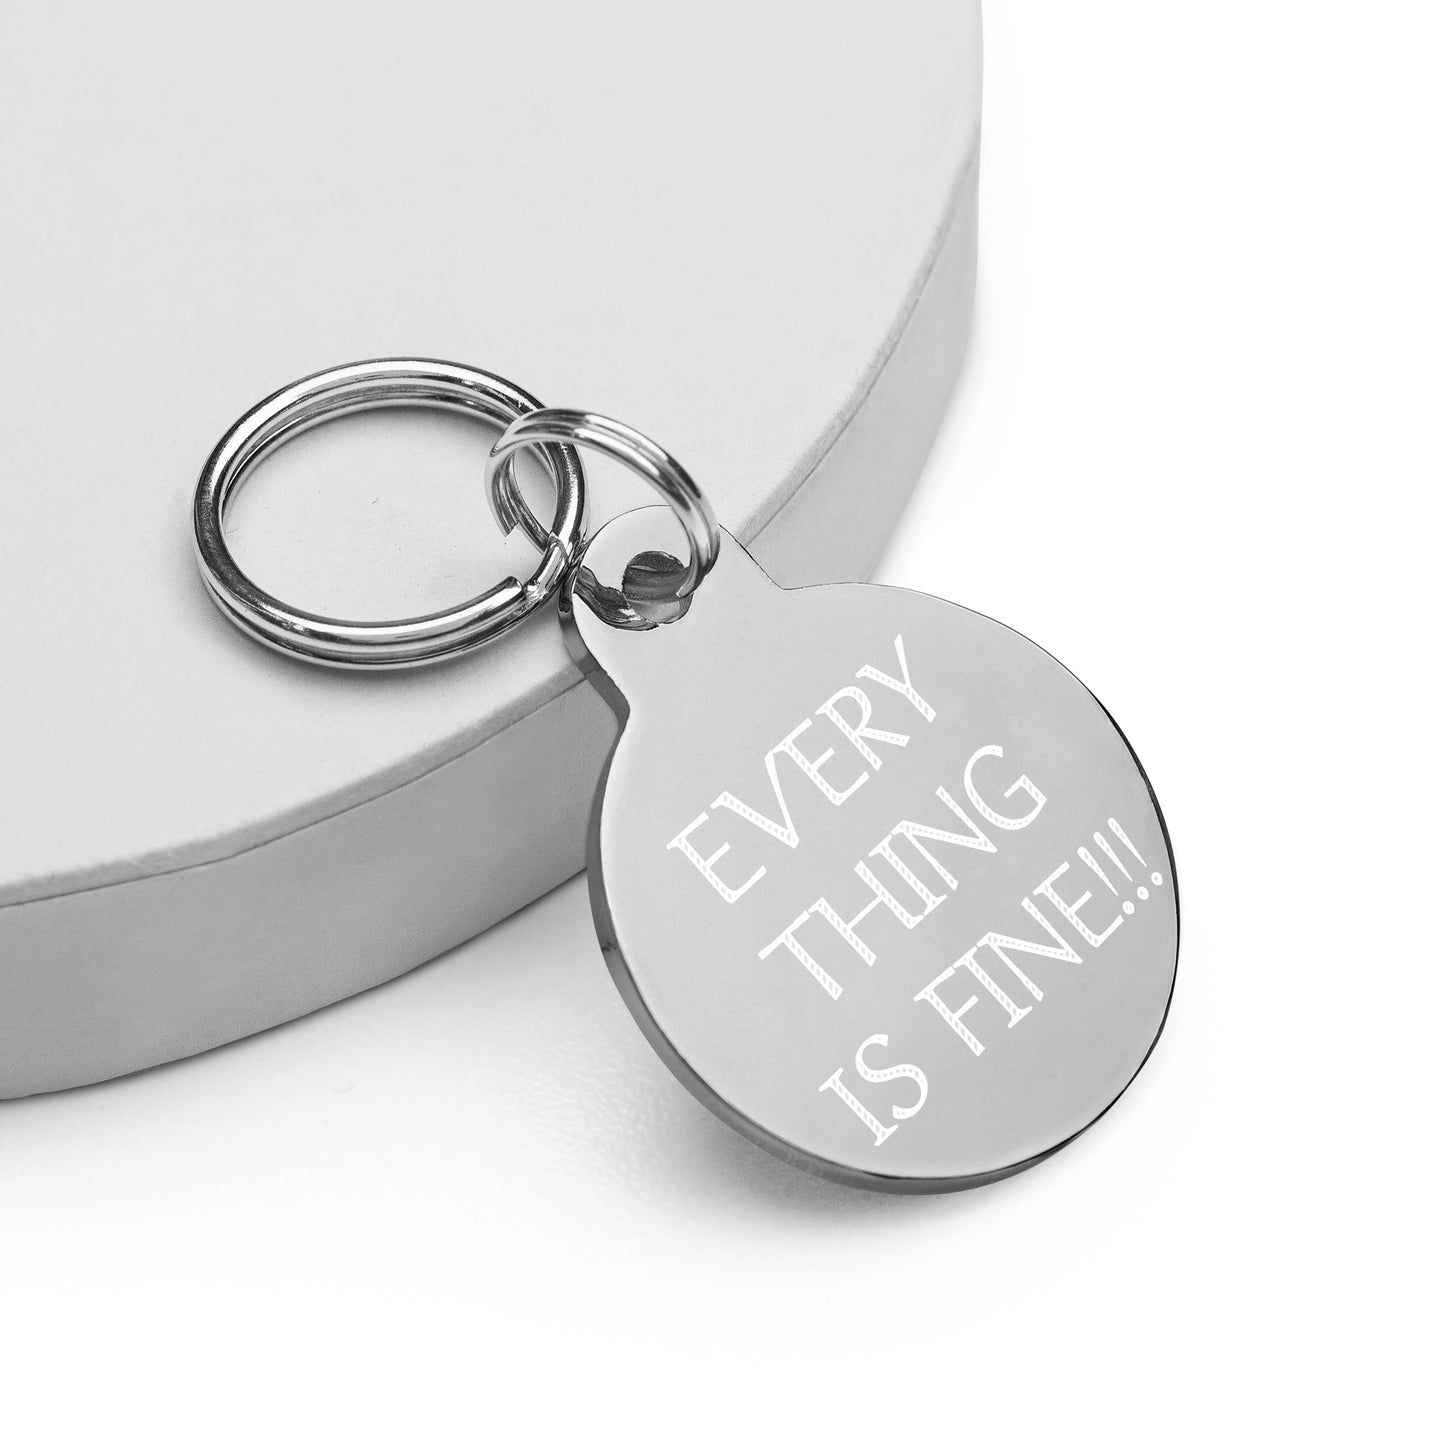 EVERY THING IS FINE!!! - Keychain